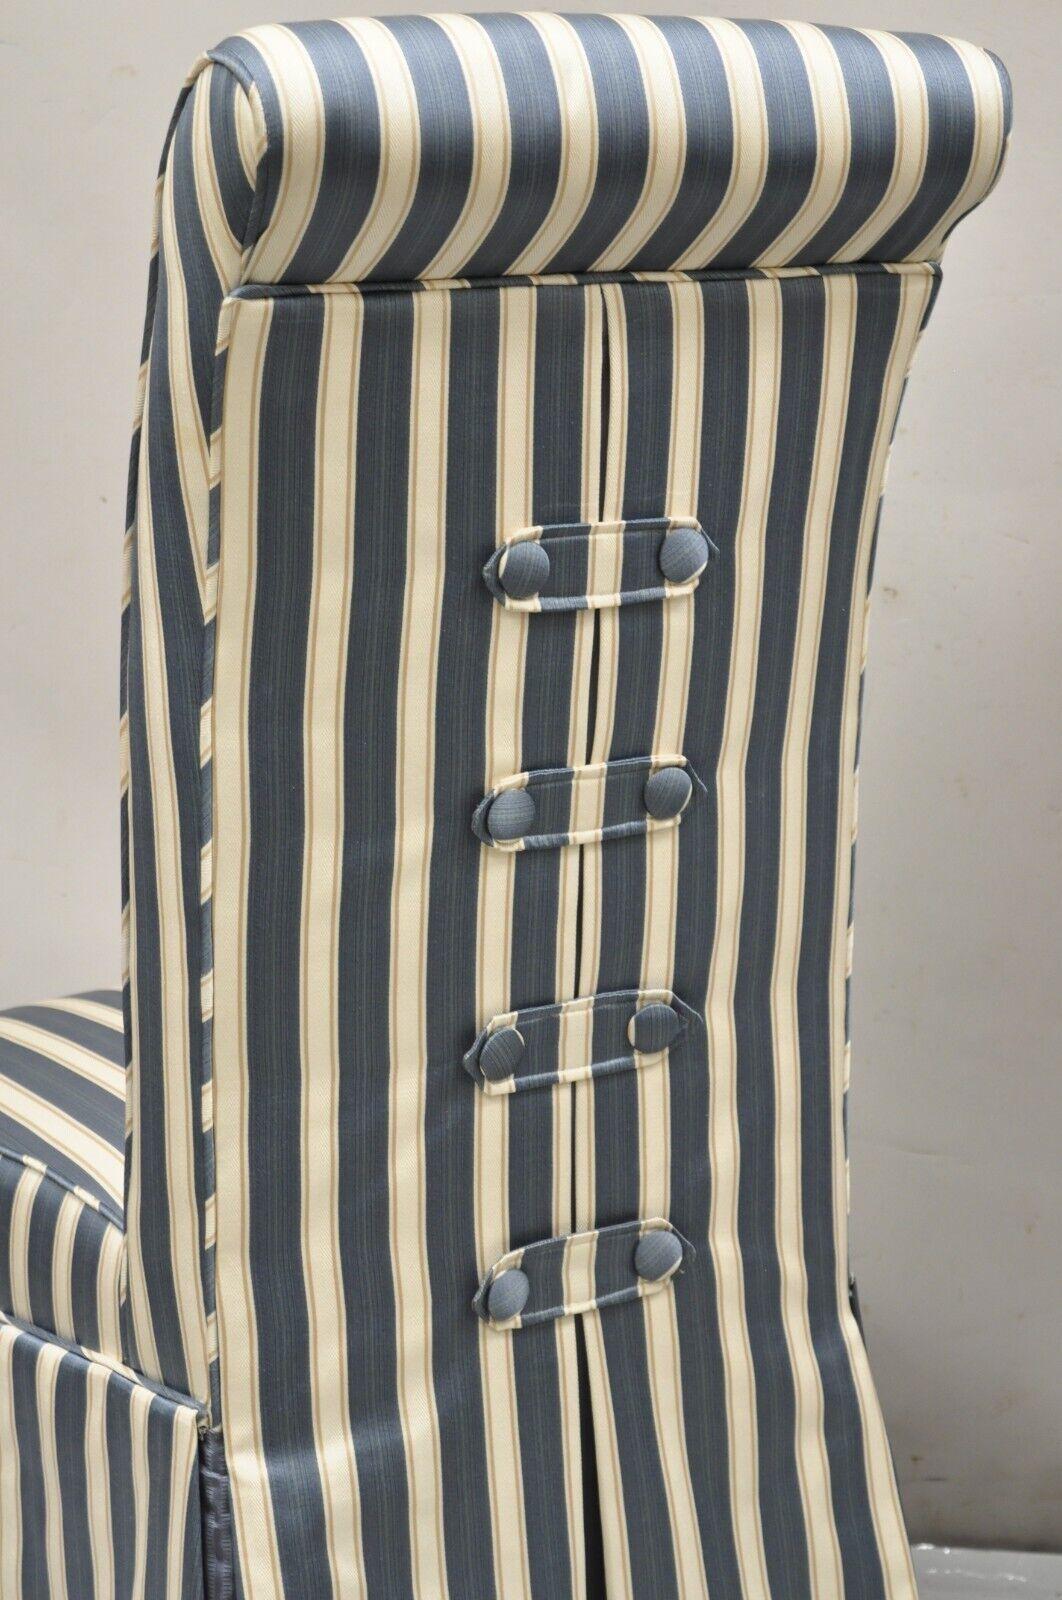 Hollywood Regency Custom Blue & Cream Striped Parsons Dining Chairs w/ Button Backs - Set of 6 For Sale